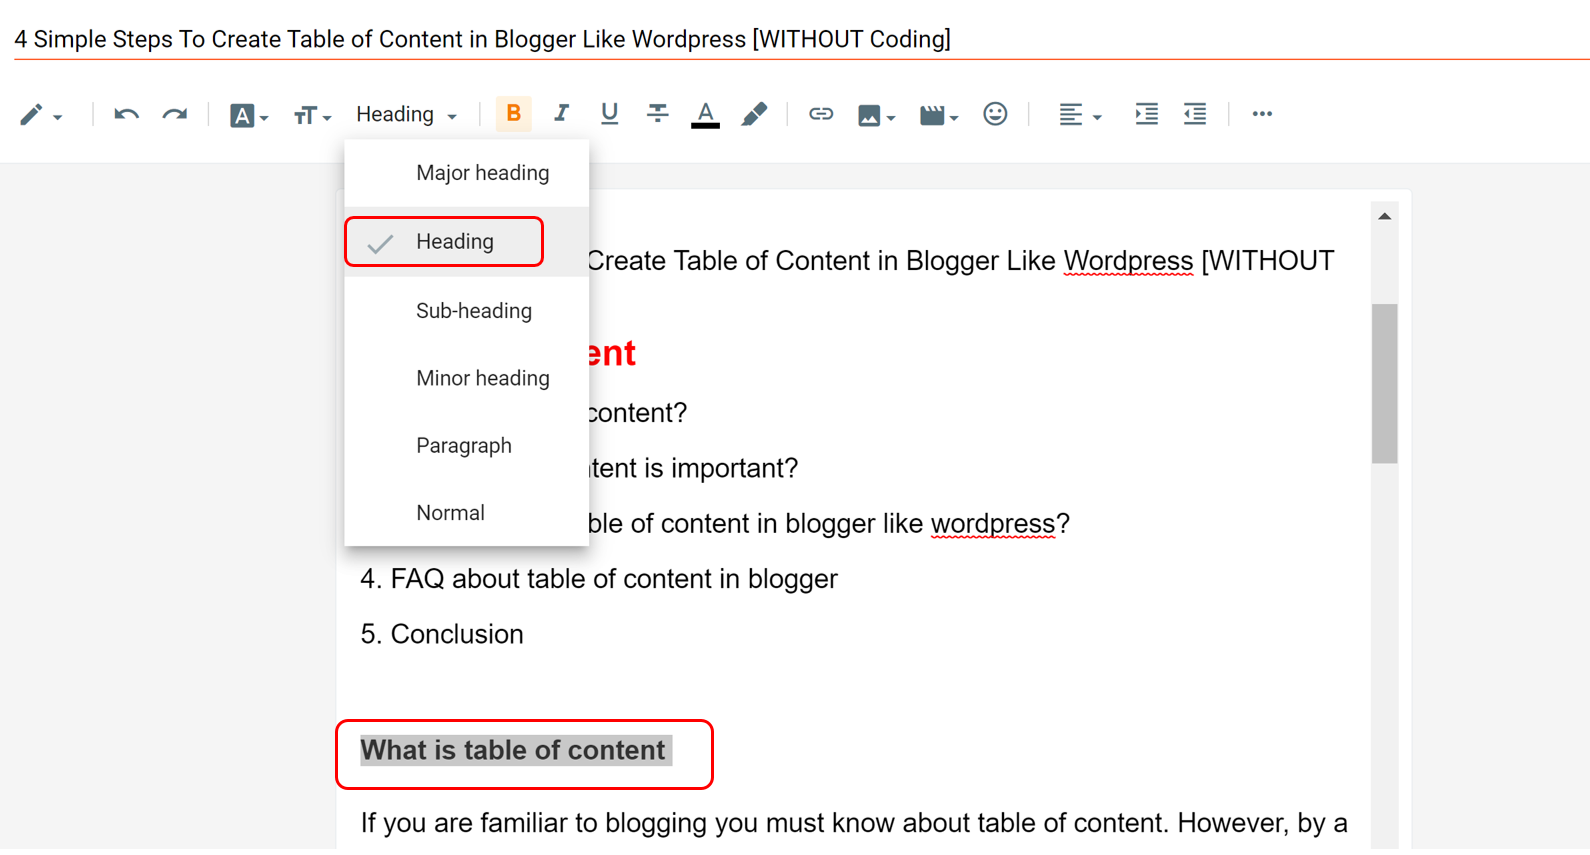 How to create table of content in blogger like wordpress